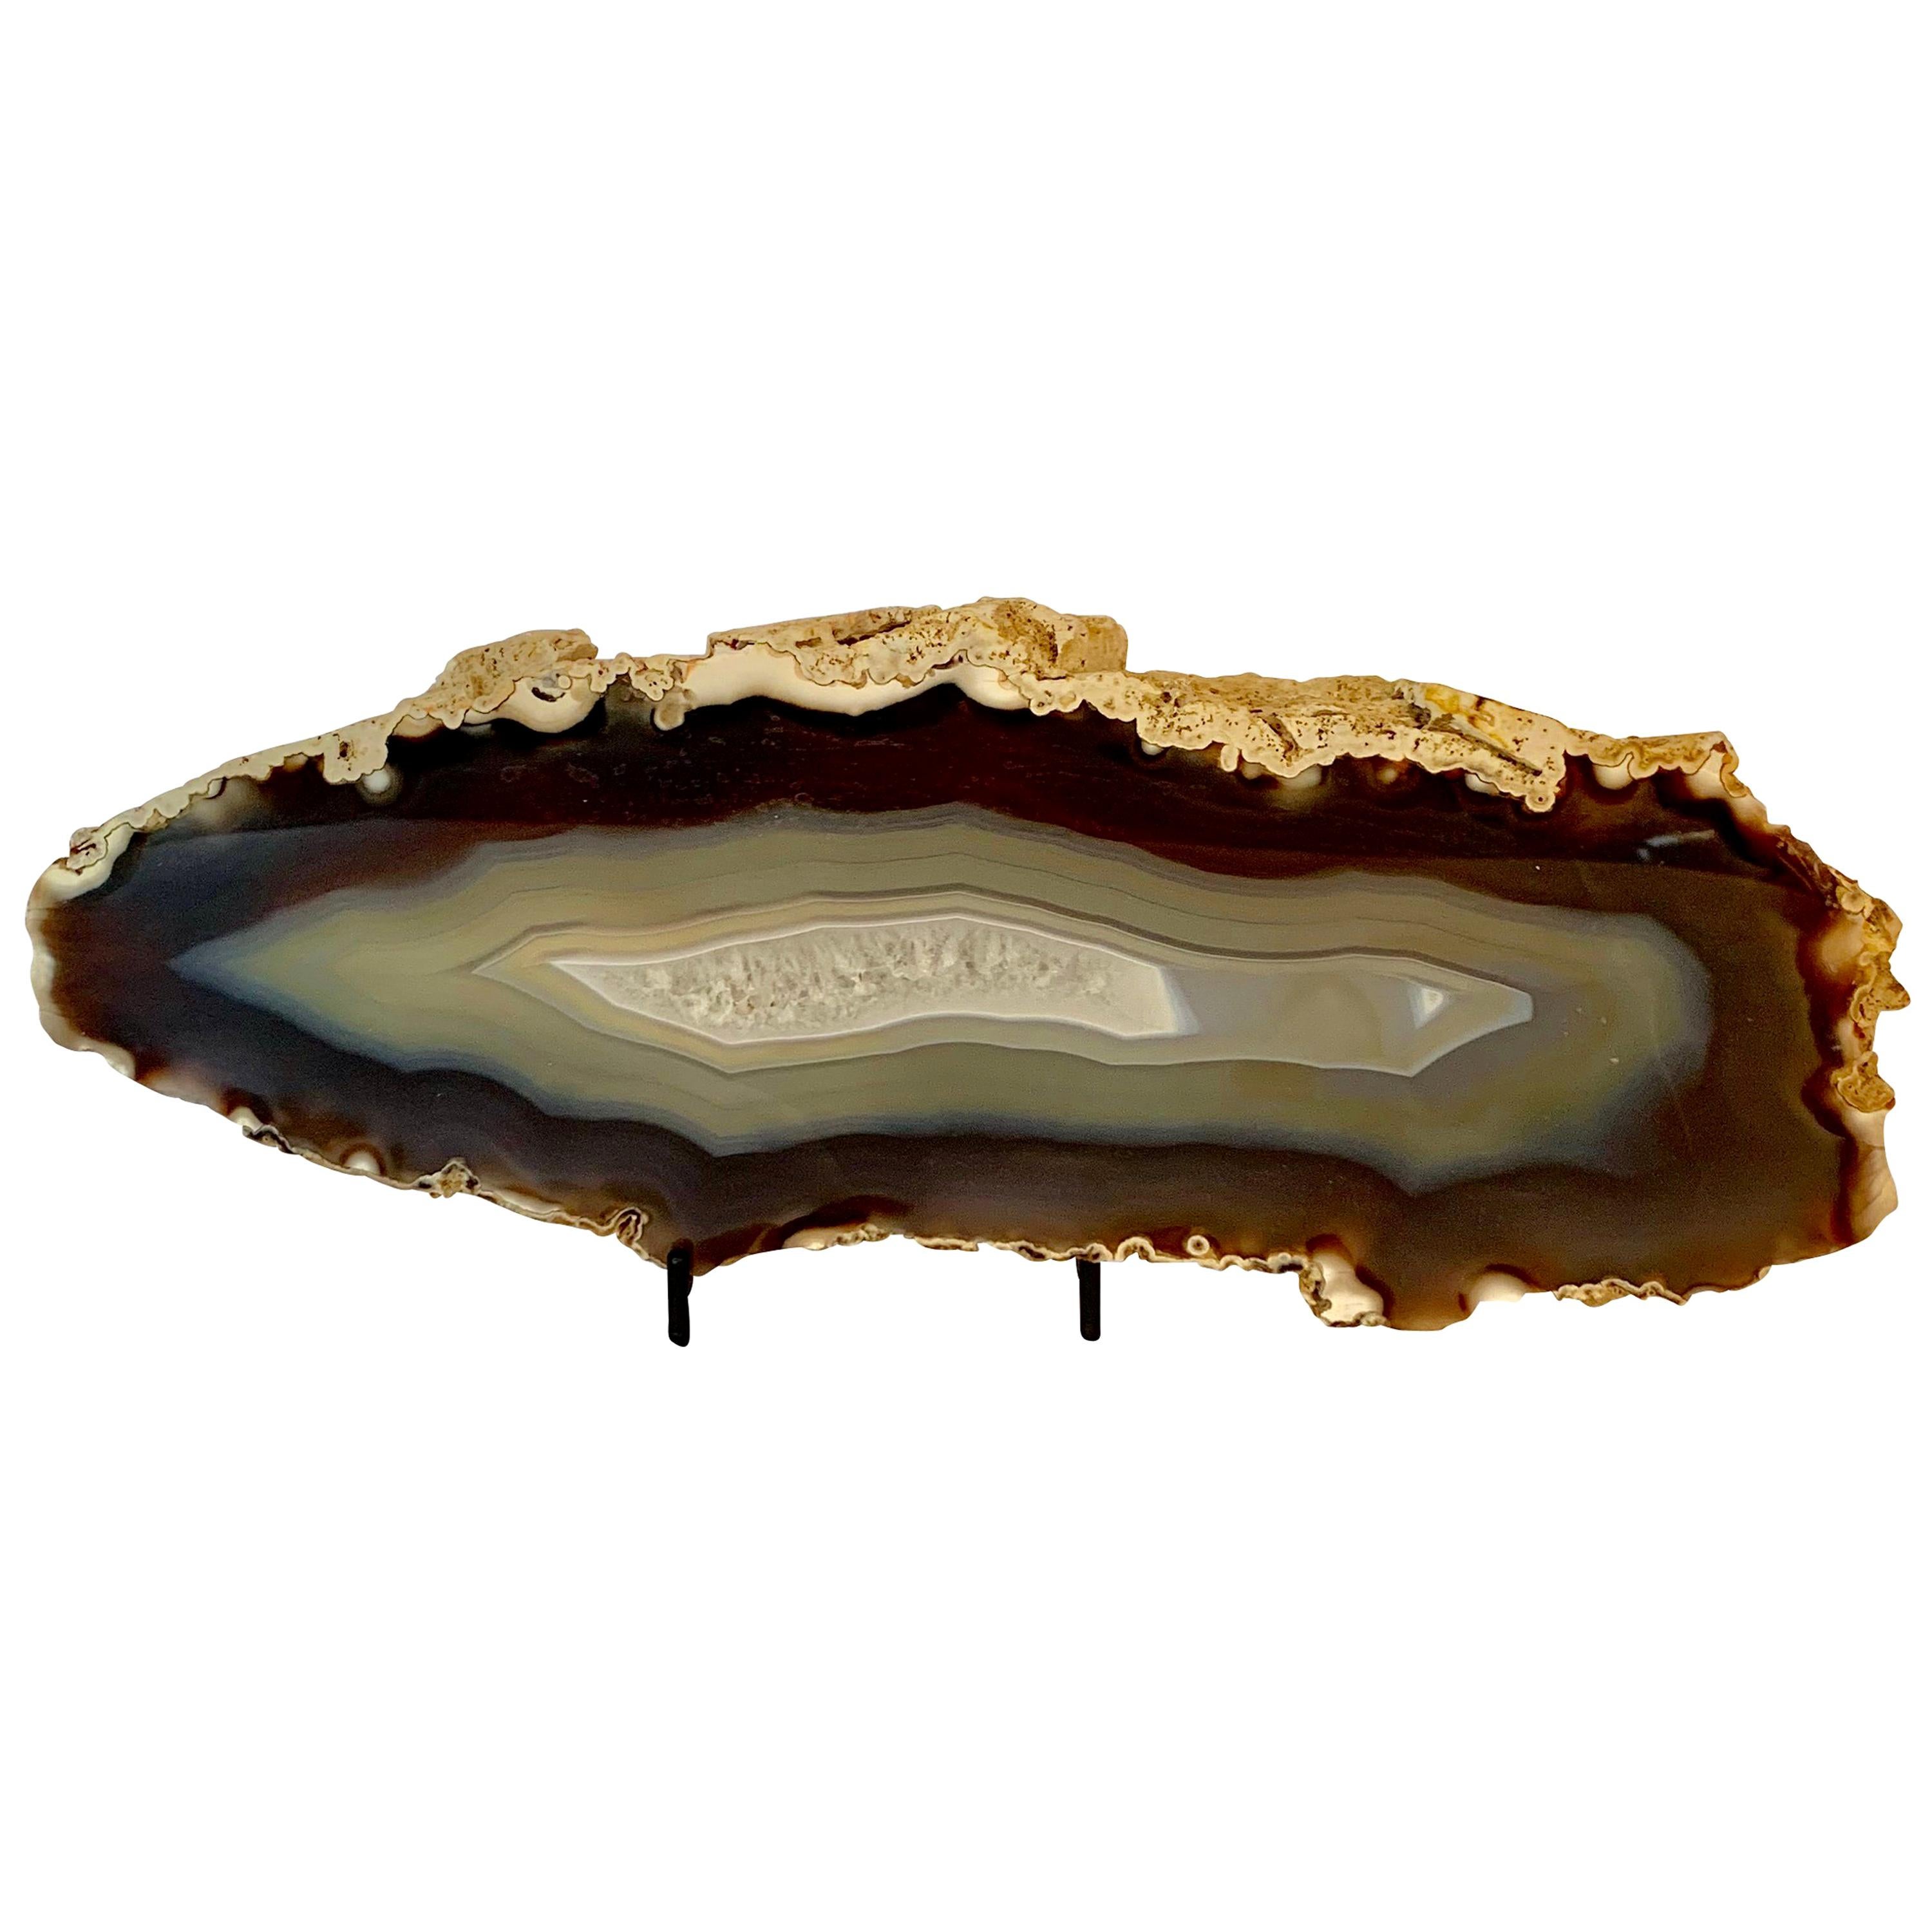 Brazilian Sliced Agate Sculpture on Stand